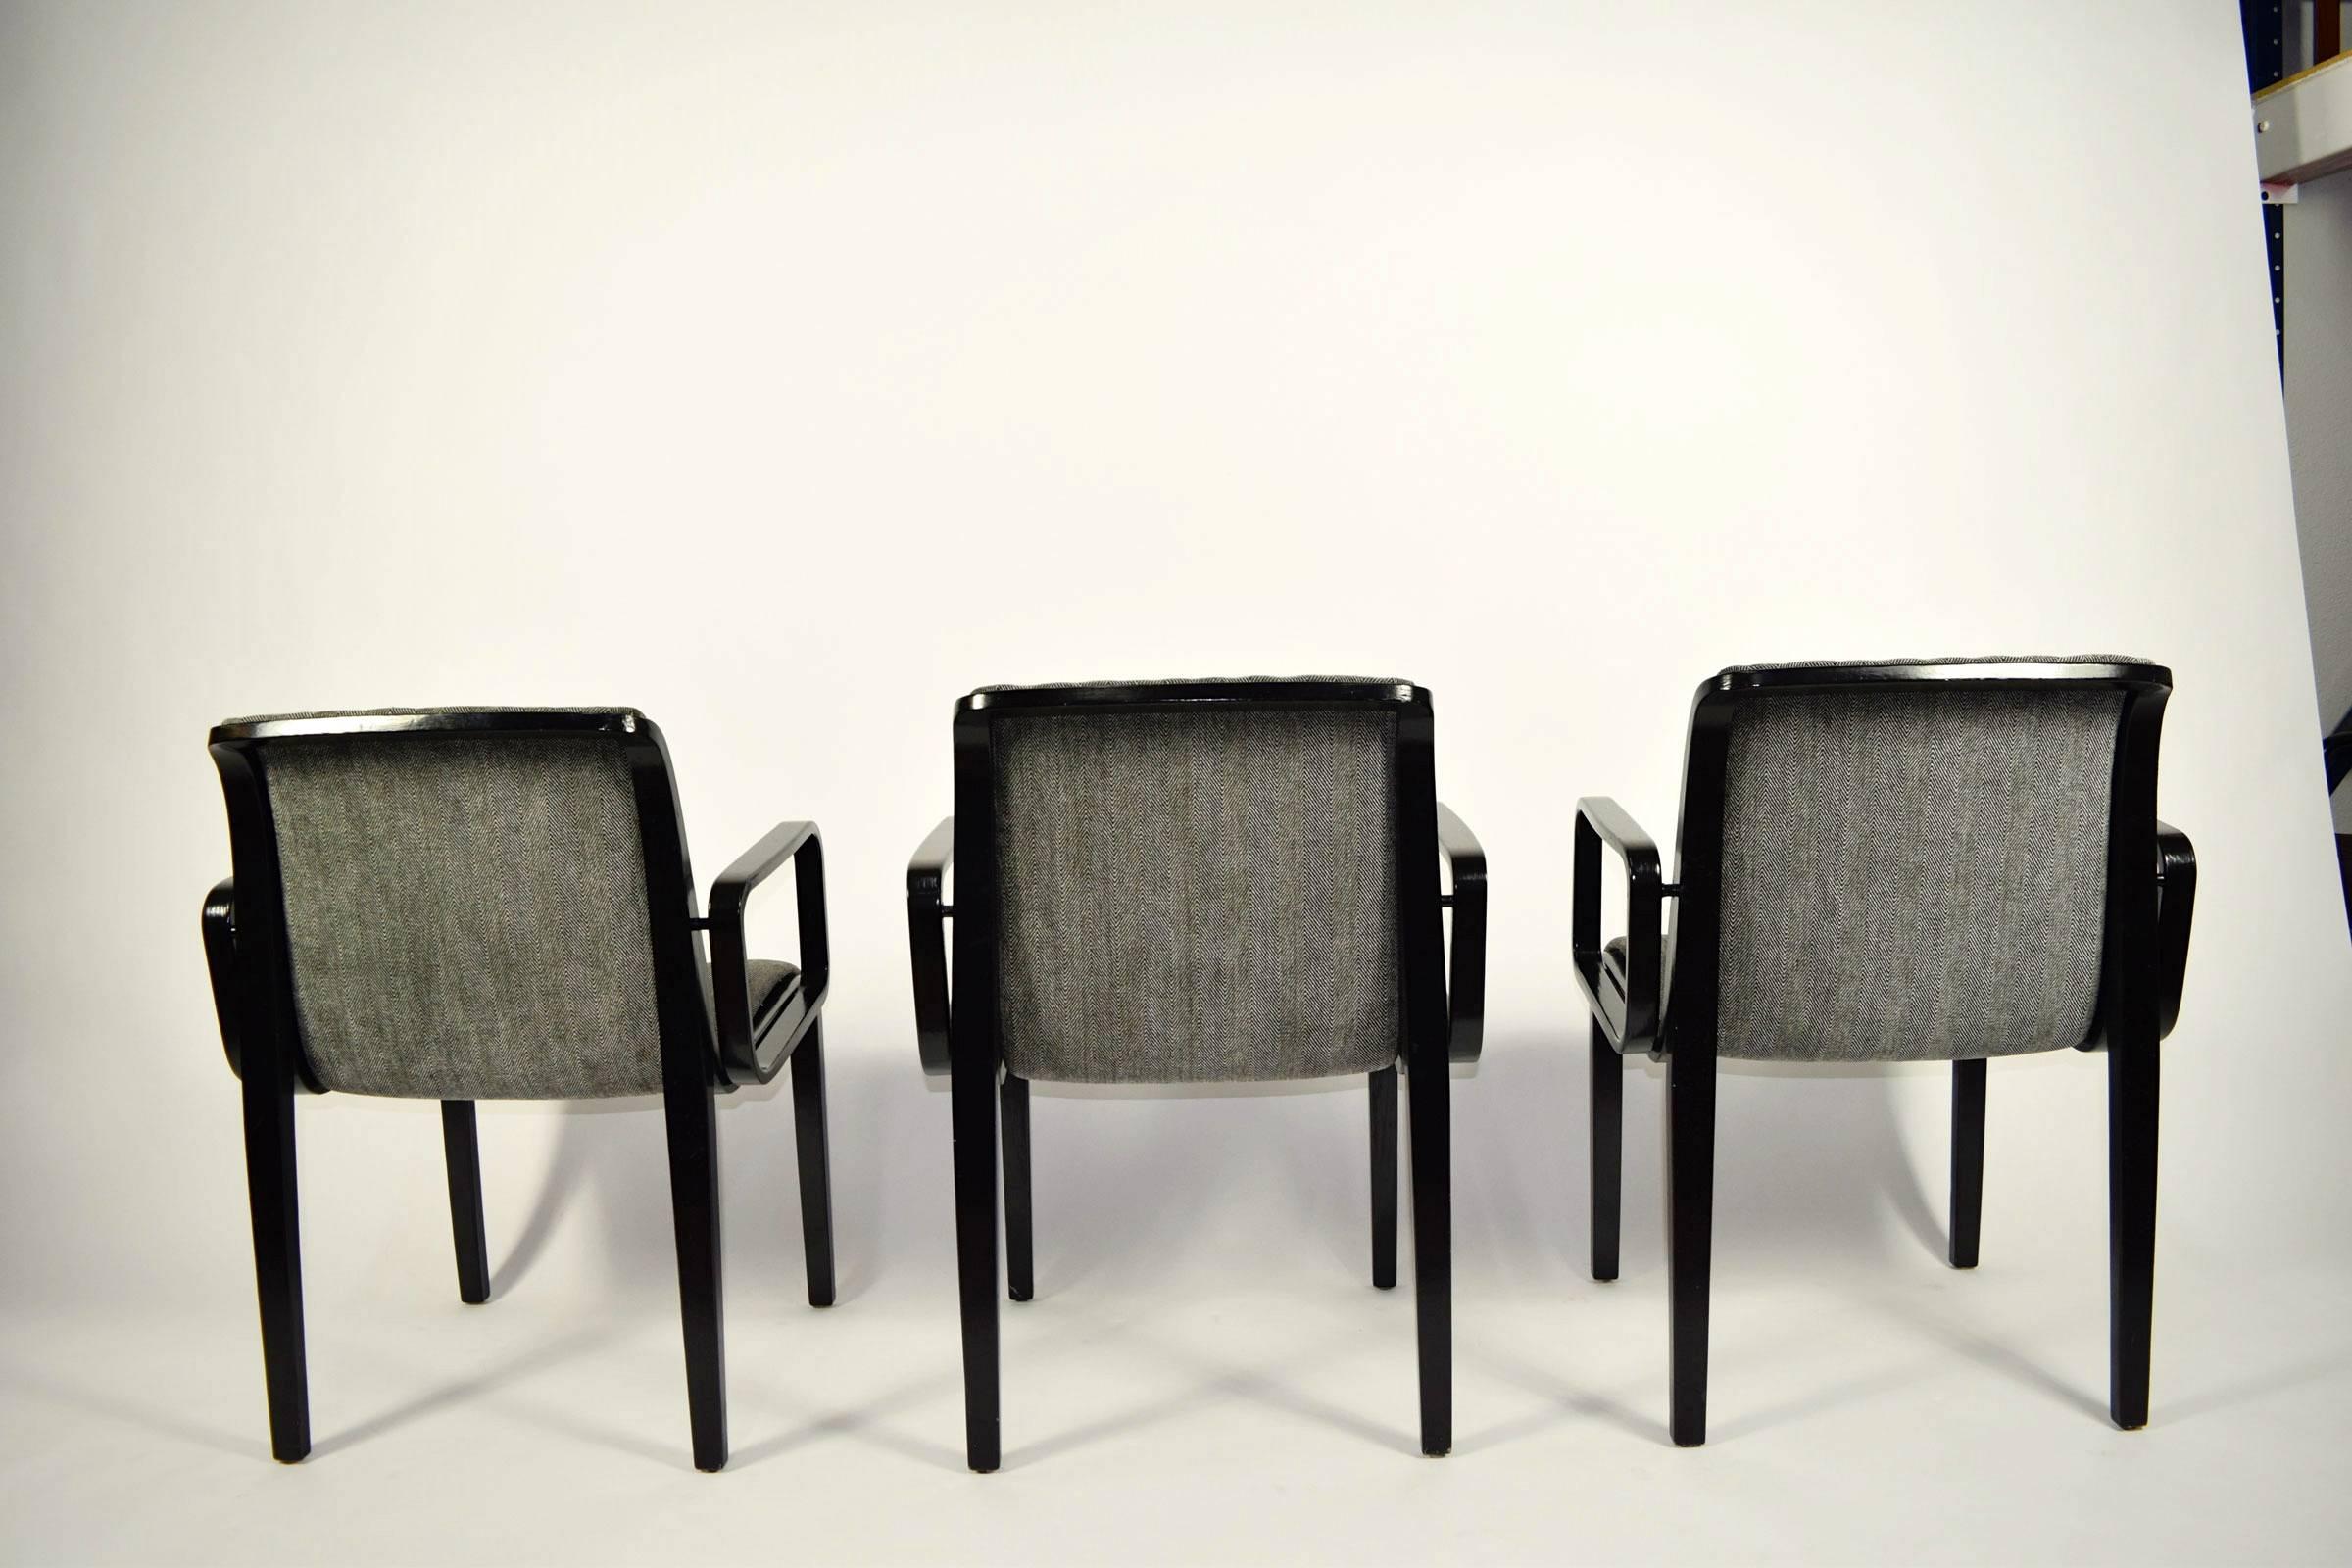 Set of six Bill Stephens for Knoll dining chairs. In black lacquer/paint with a black and white herringbone fabric. All chairs have arms.